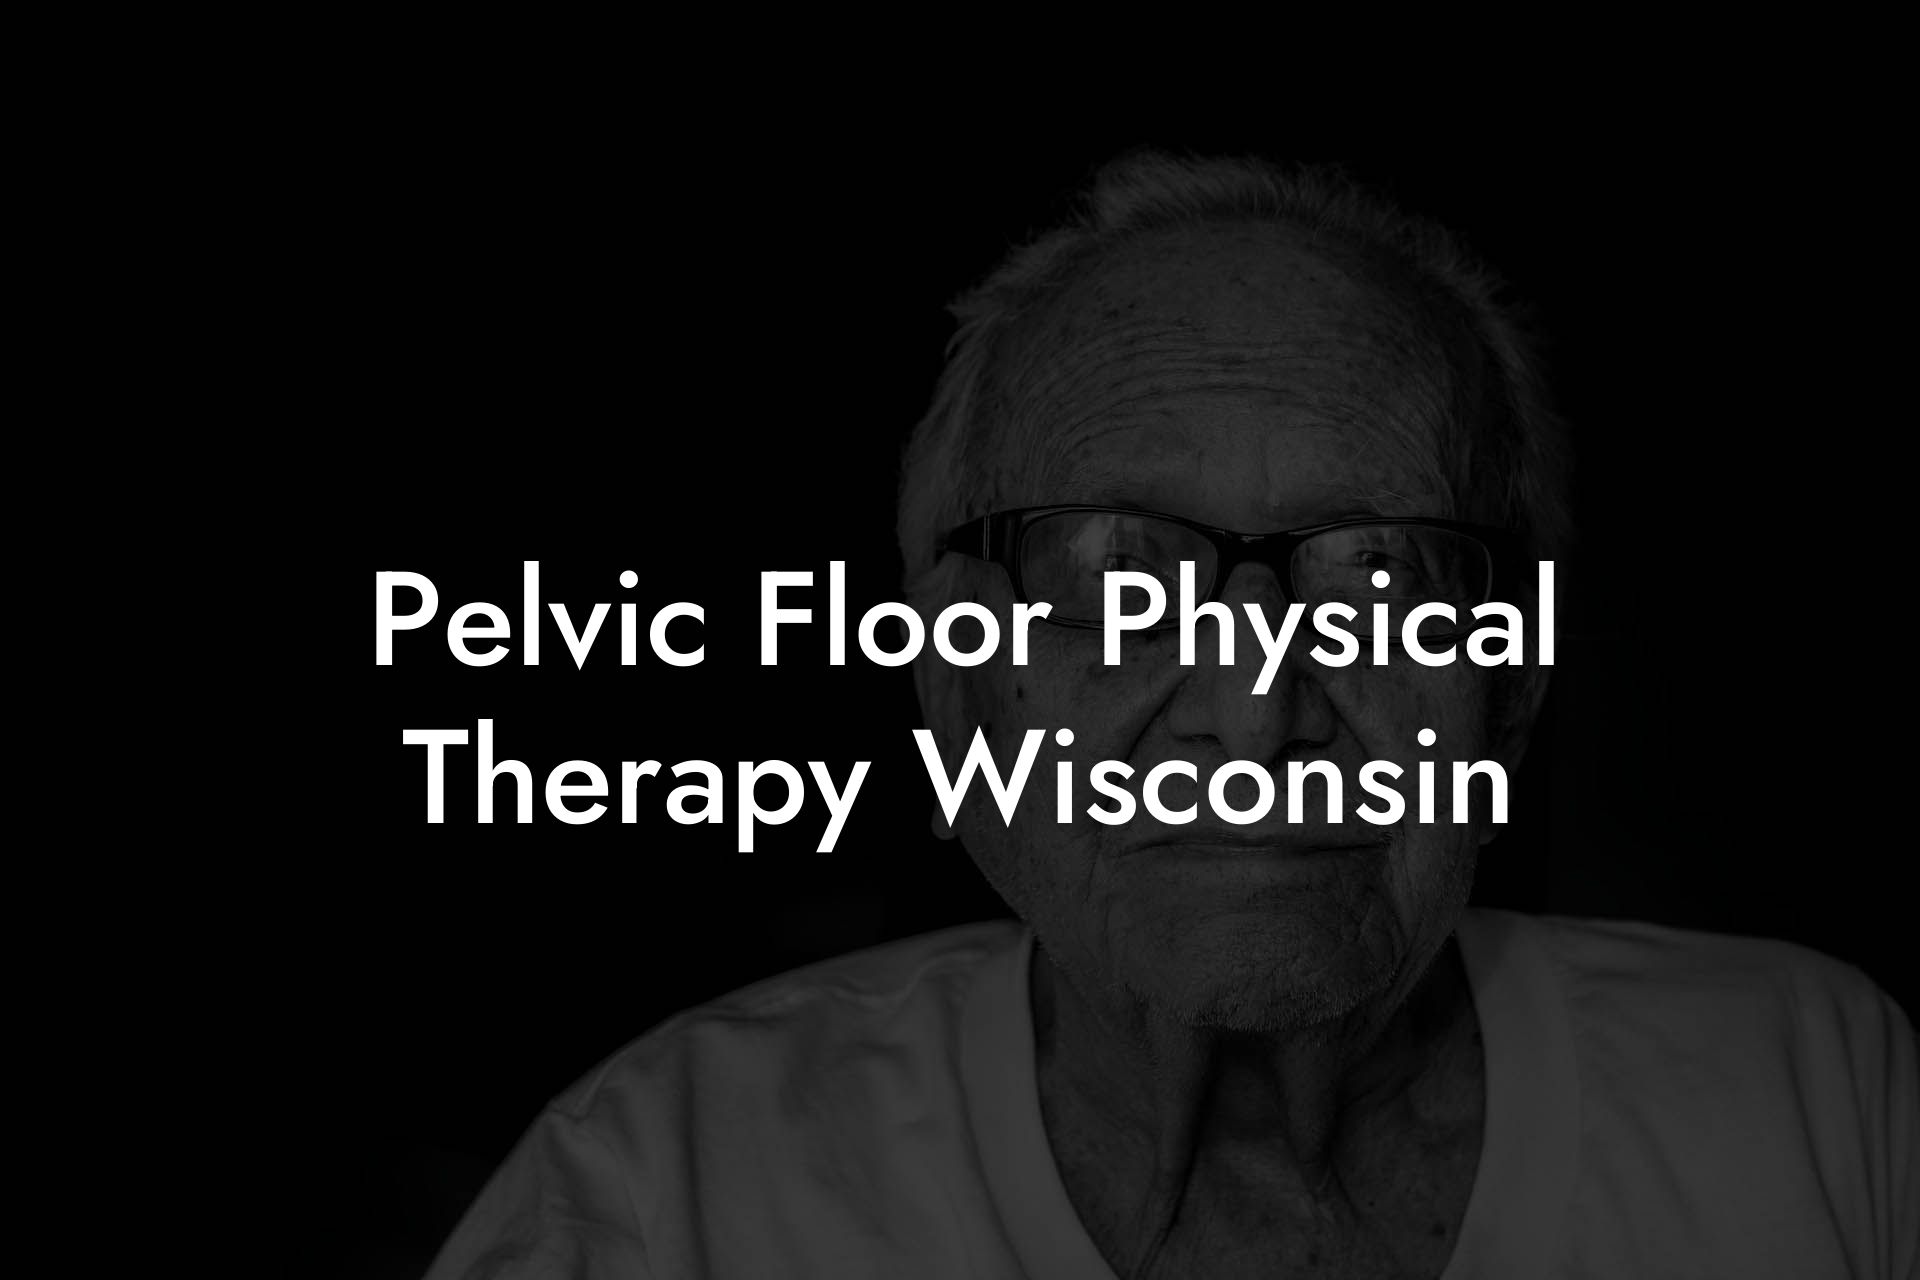 Pelvic Floor Physical Therapy Wisconsin